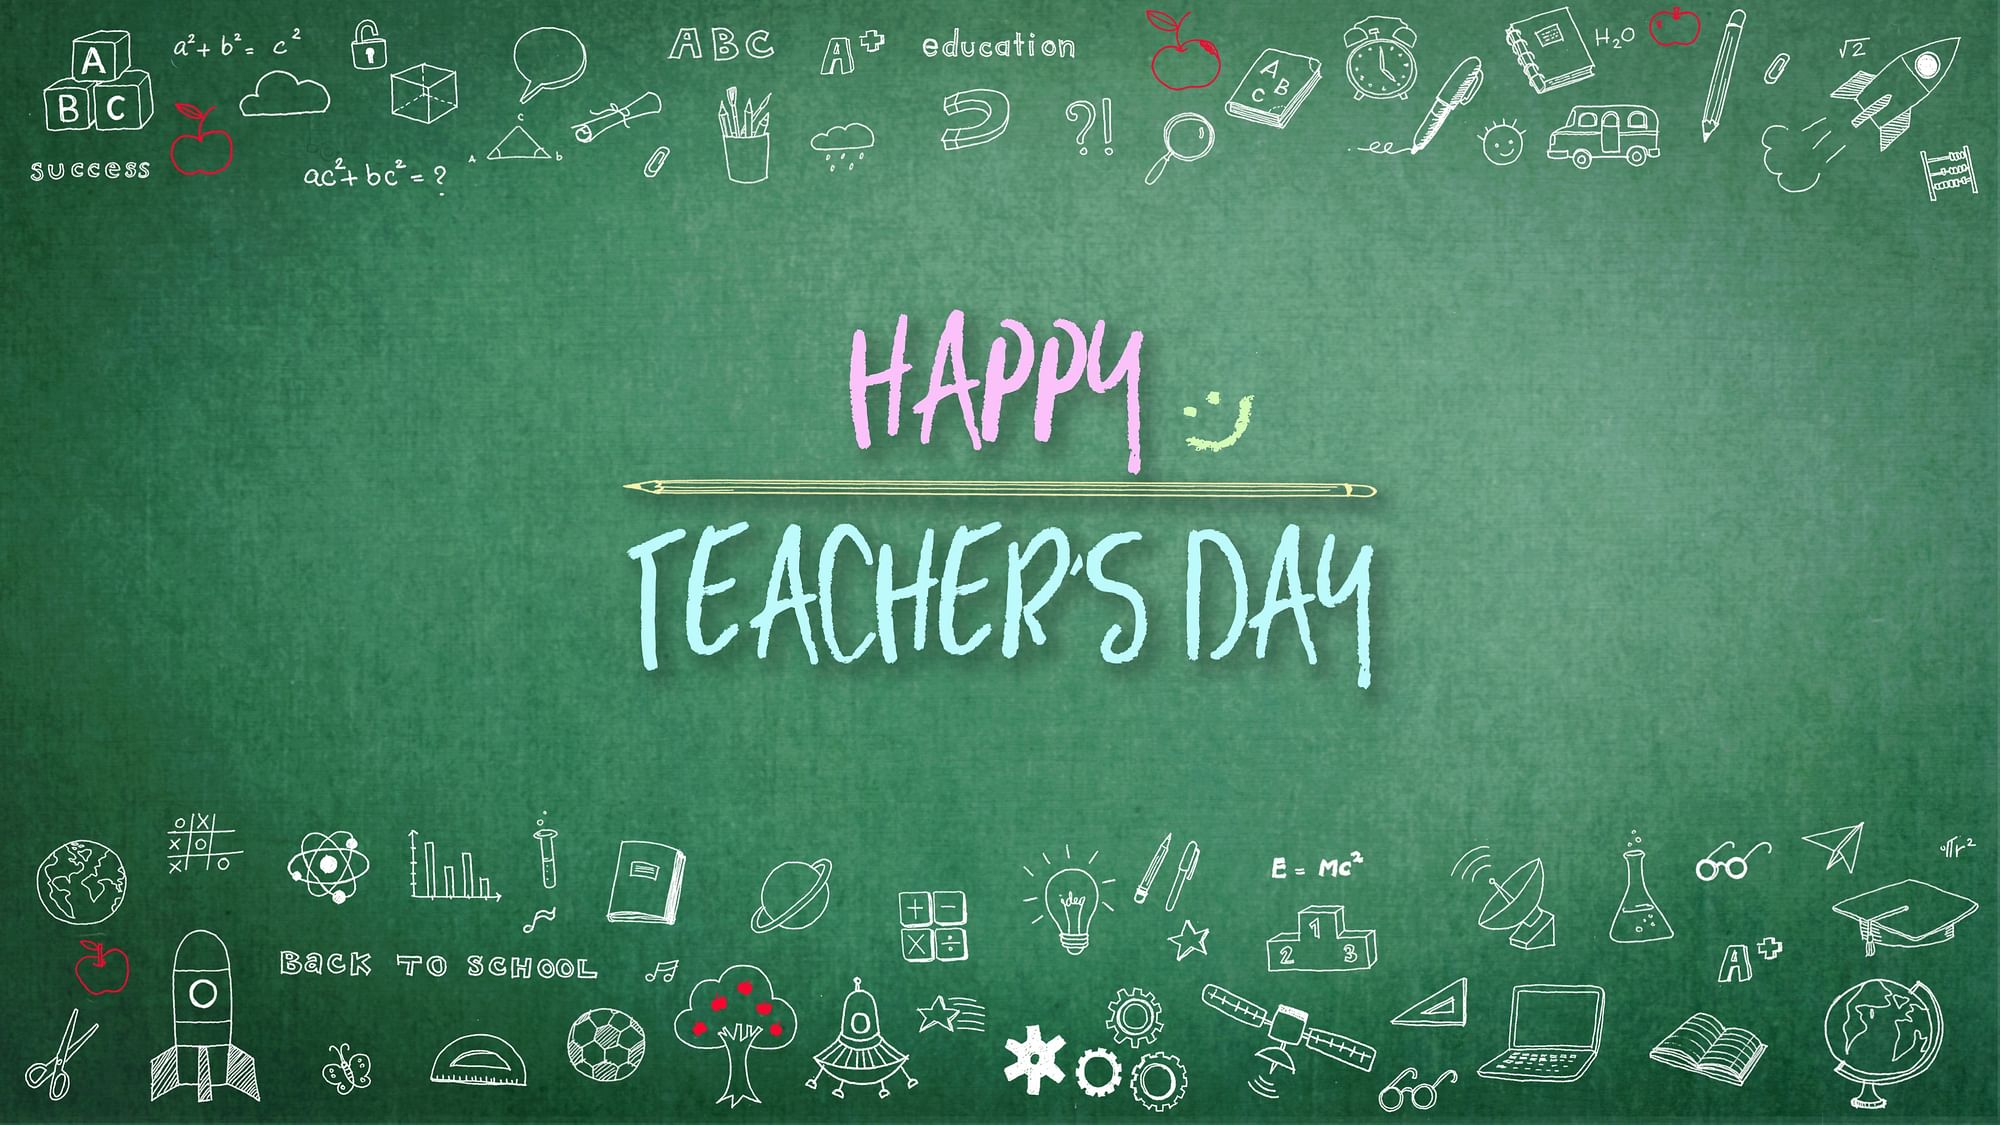 Happy Teachers' Day 2022 Wishes, Quotes, Image, Greetings, SMS in English, Hindi, Share With Teachers, Post as WhatsApp, Facebook, and Instagram Statuses